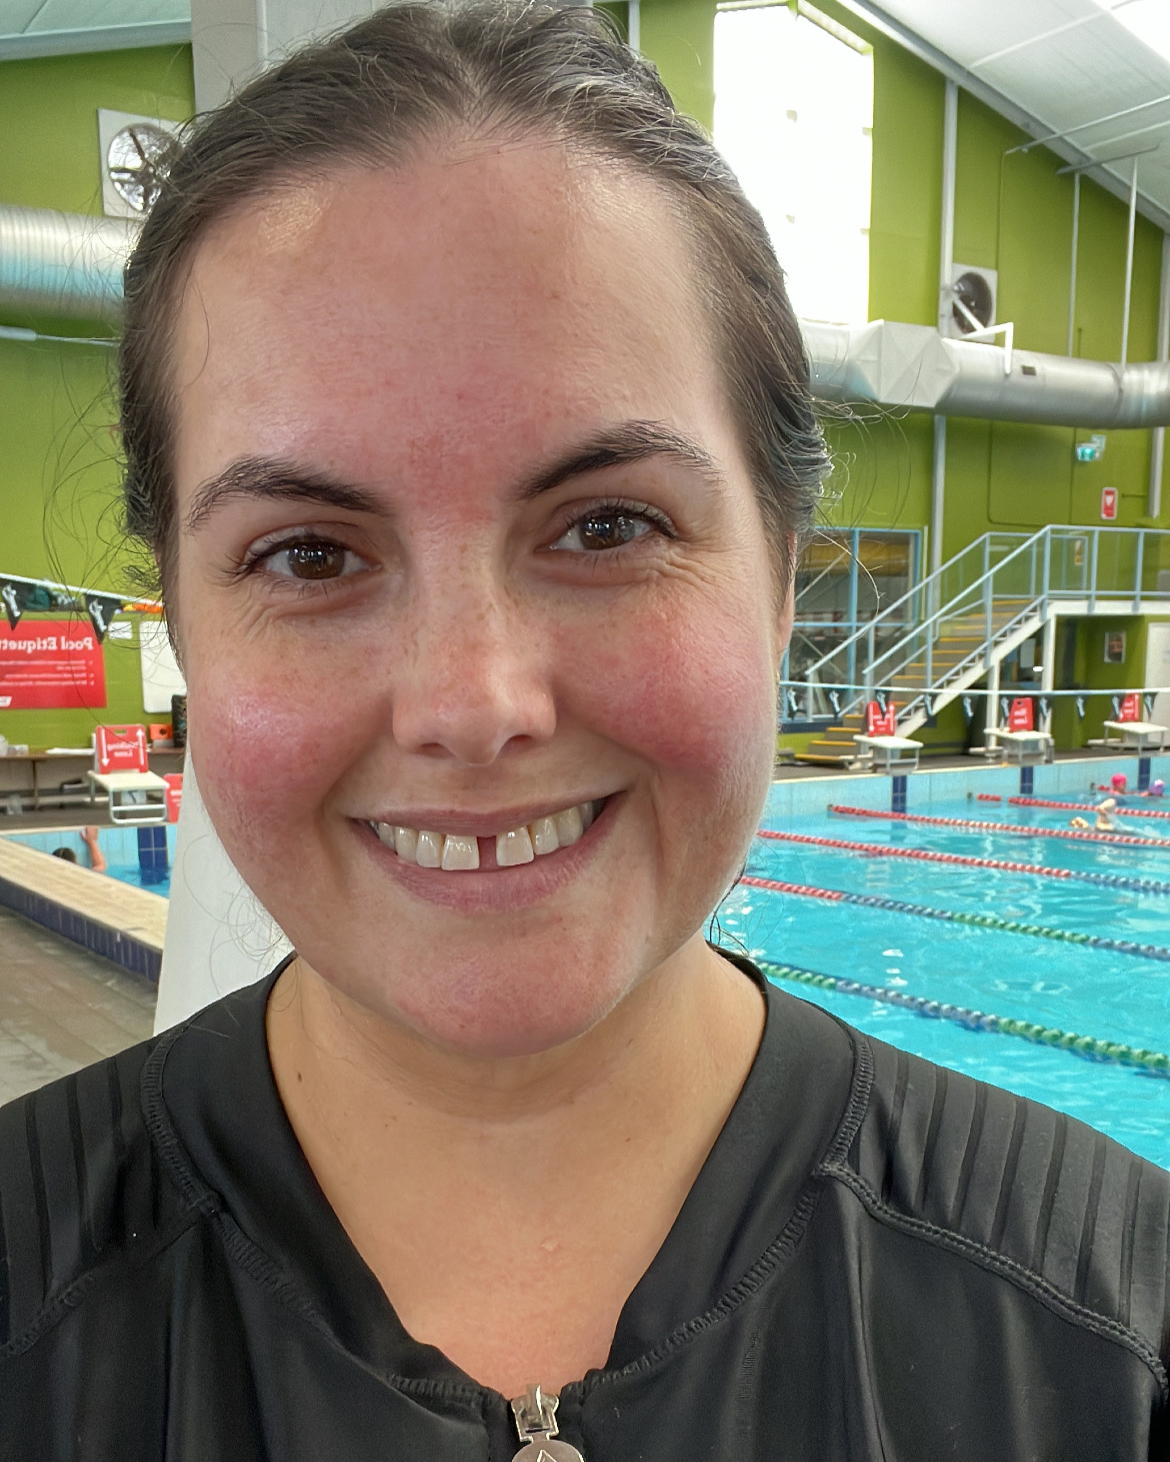 A selfie of a Māori woman at an indoor swimming pool. She is wearing a rash shirt and is smiling at the camera.